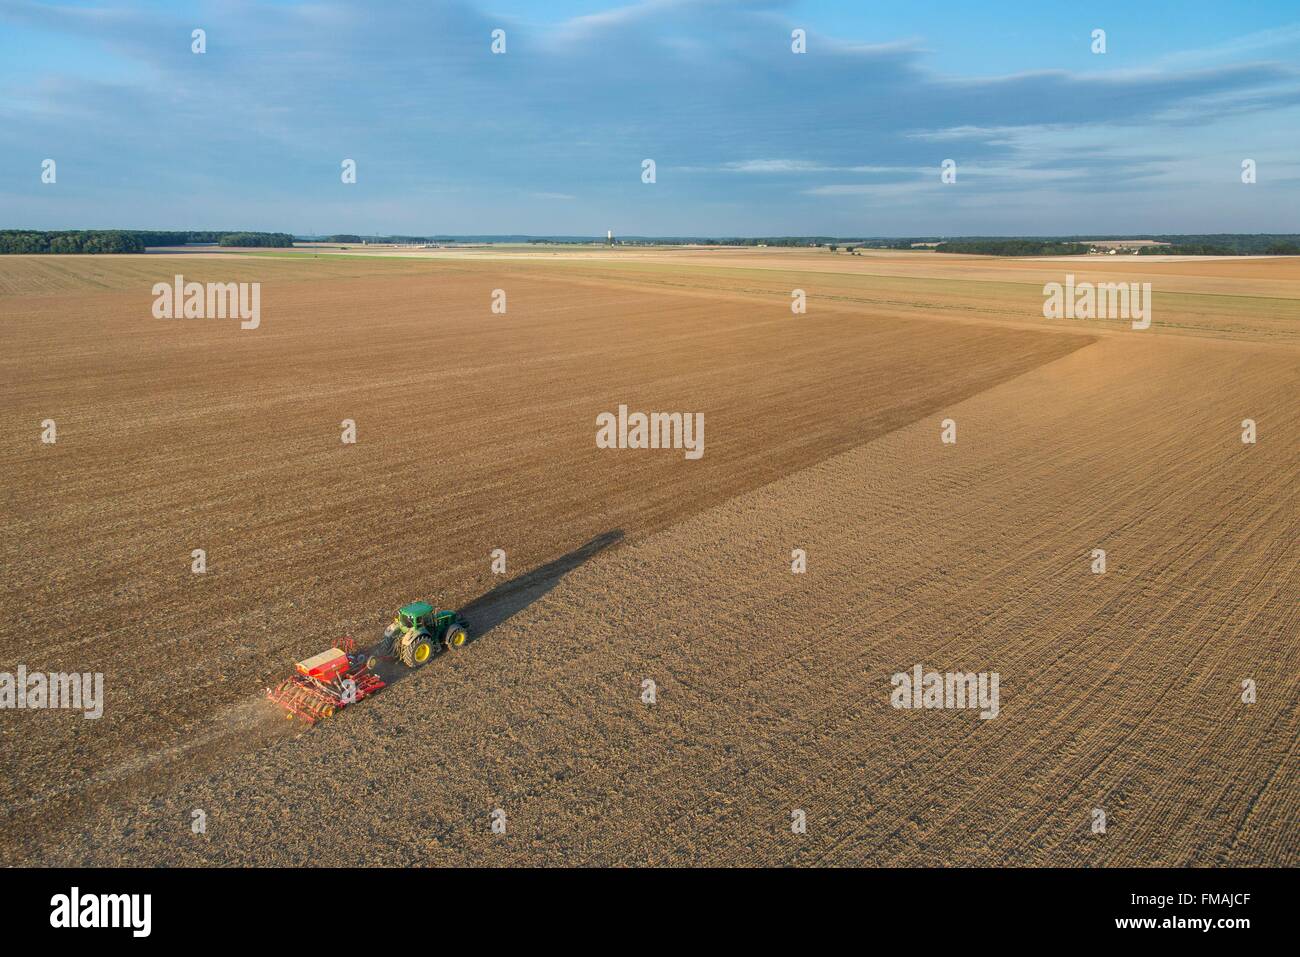 France, Eure, Saint Aubin sur Gaillon, seed sowing with pneumatic seed drill (aerial view) Stock Photo